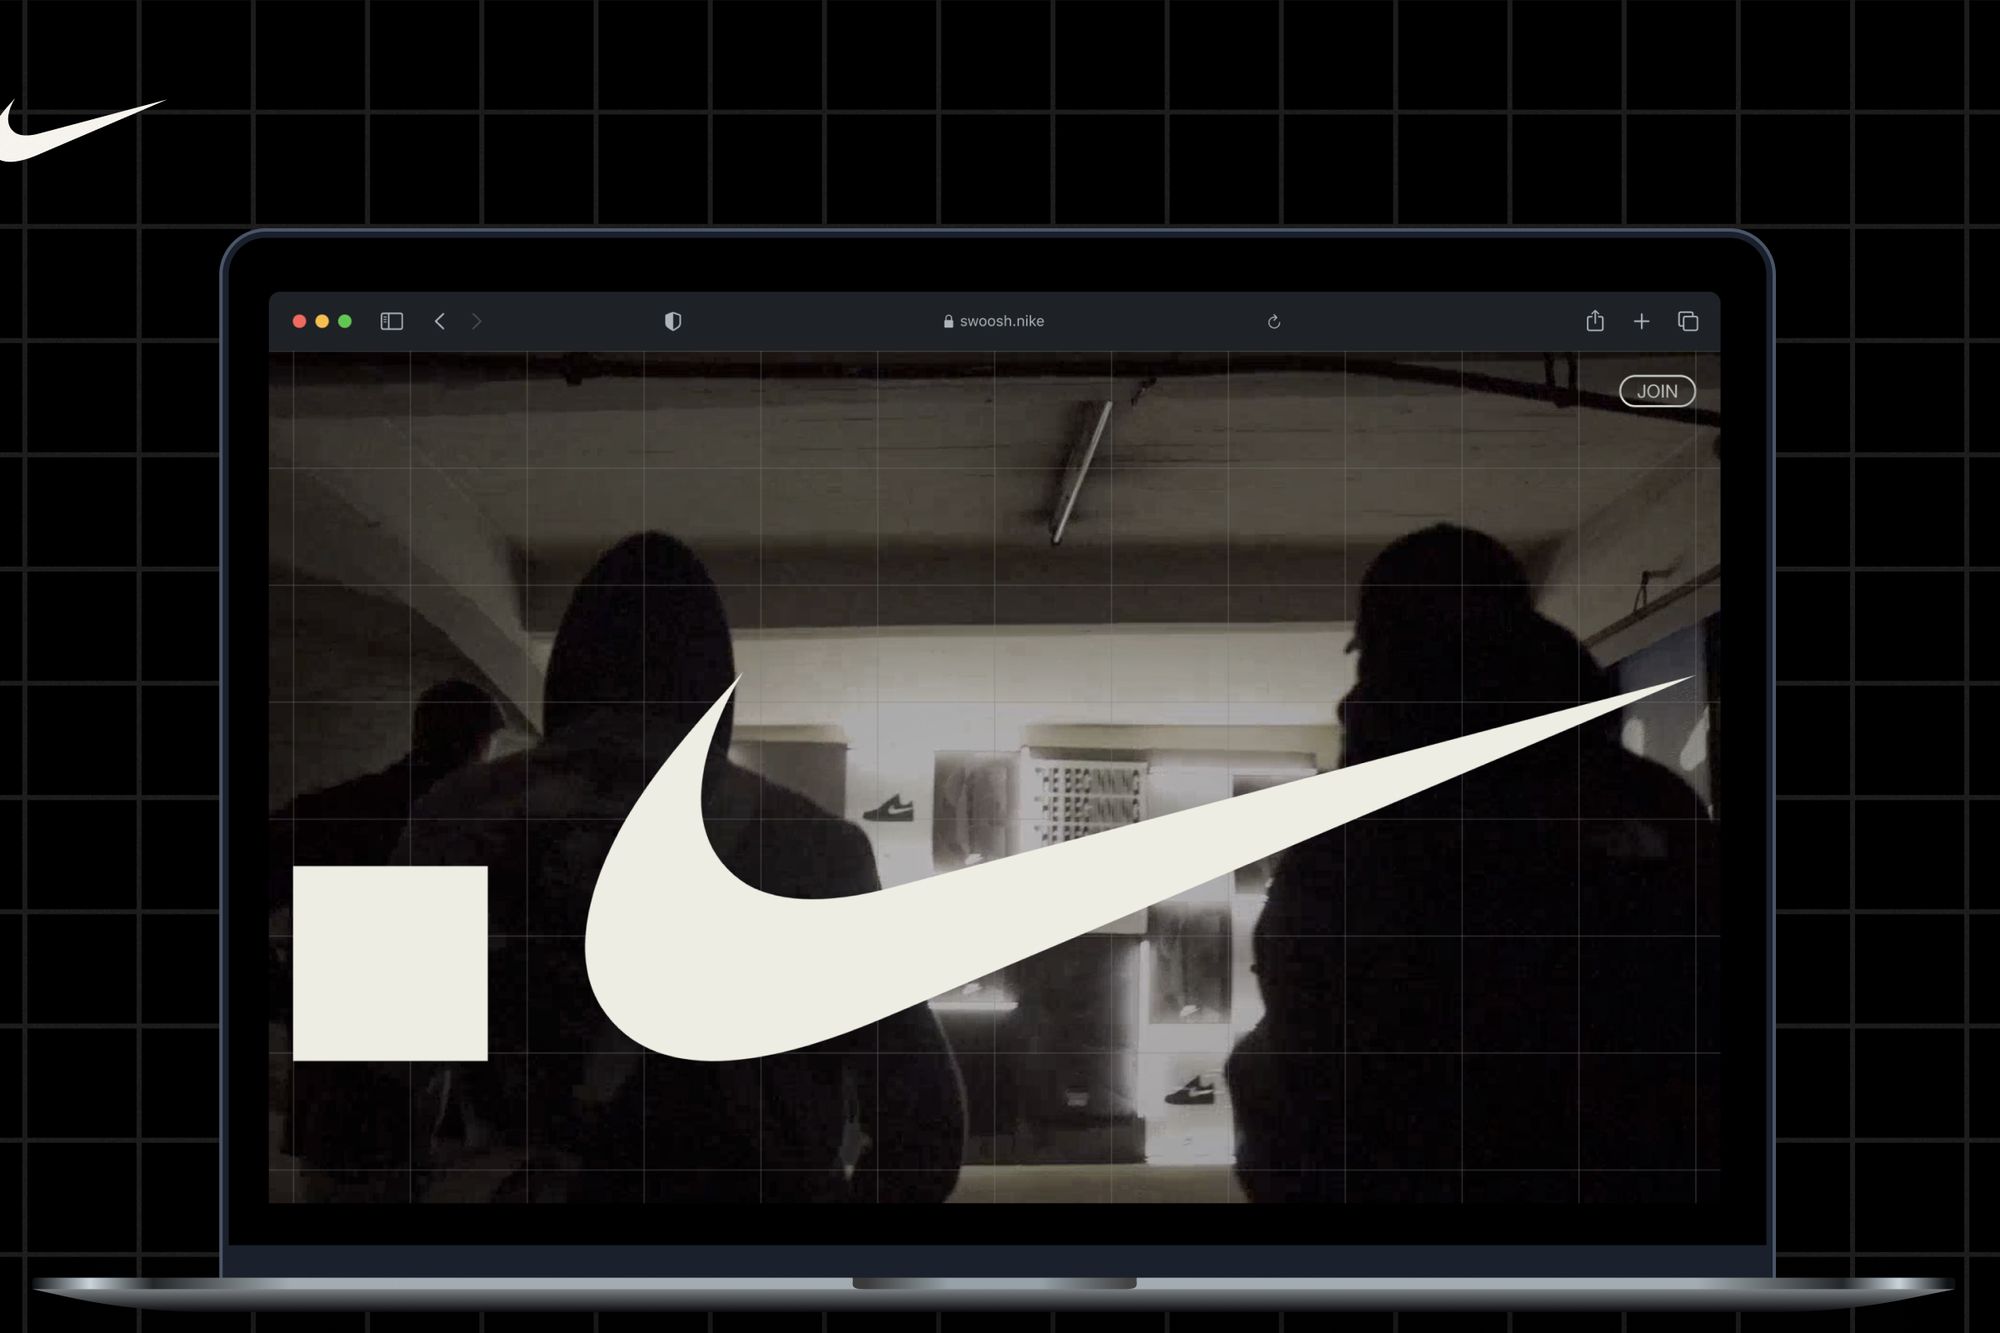 Desnatar entregar Embutido Nike is still trying to make NFTs happen with .Swoosh - The Verge